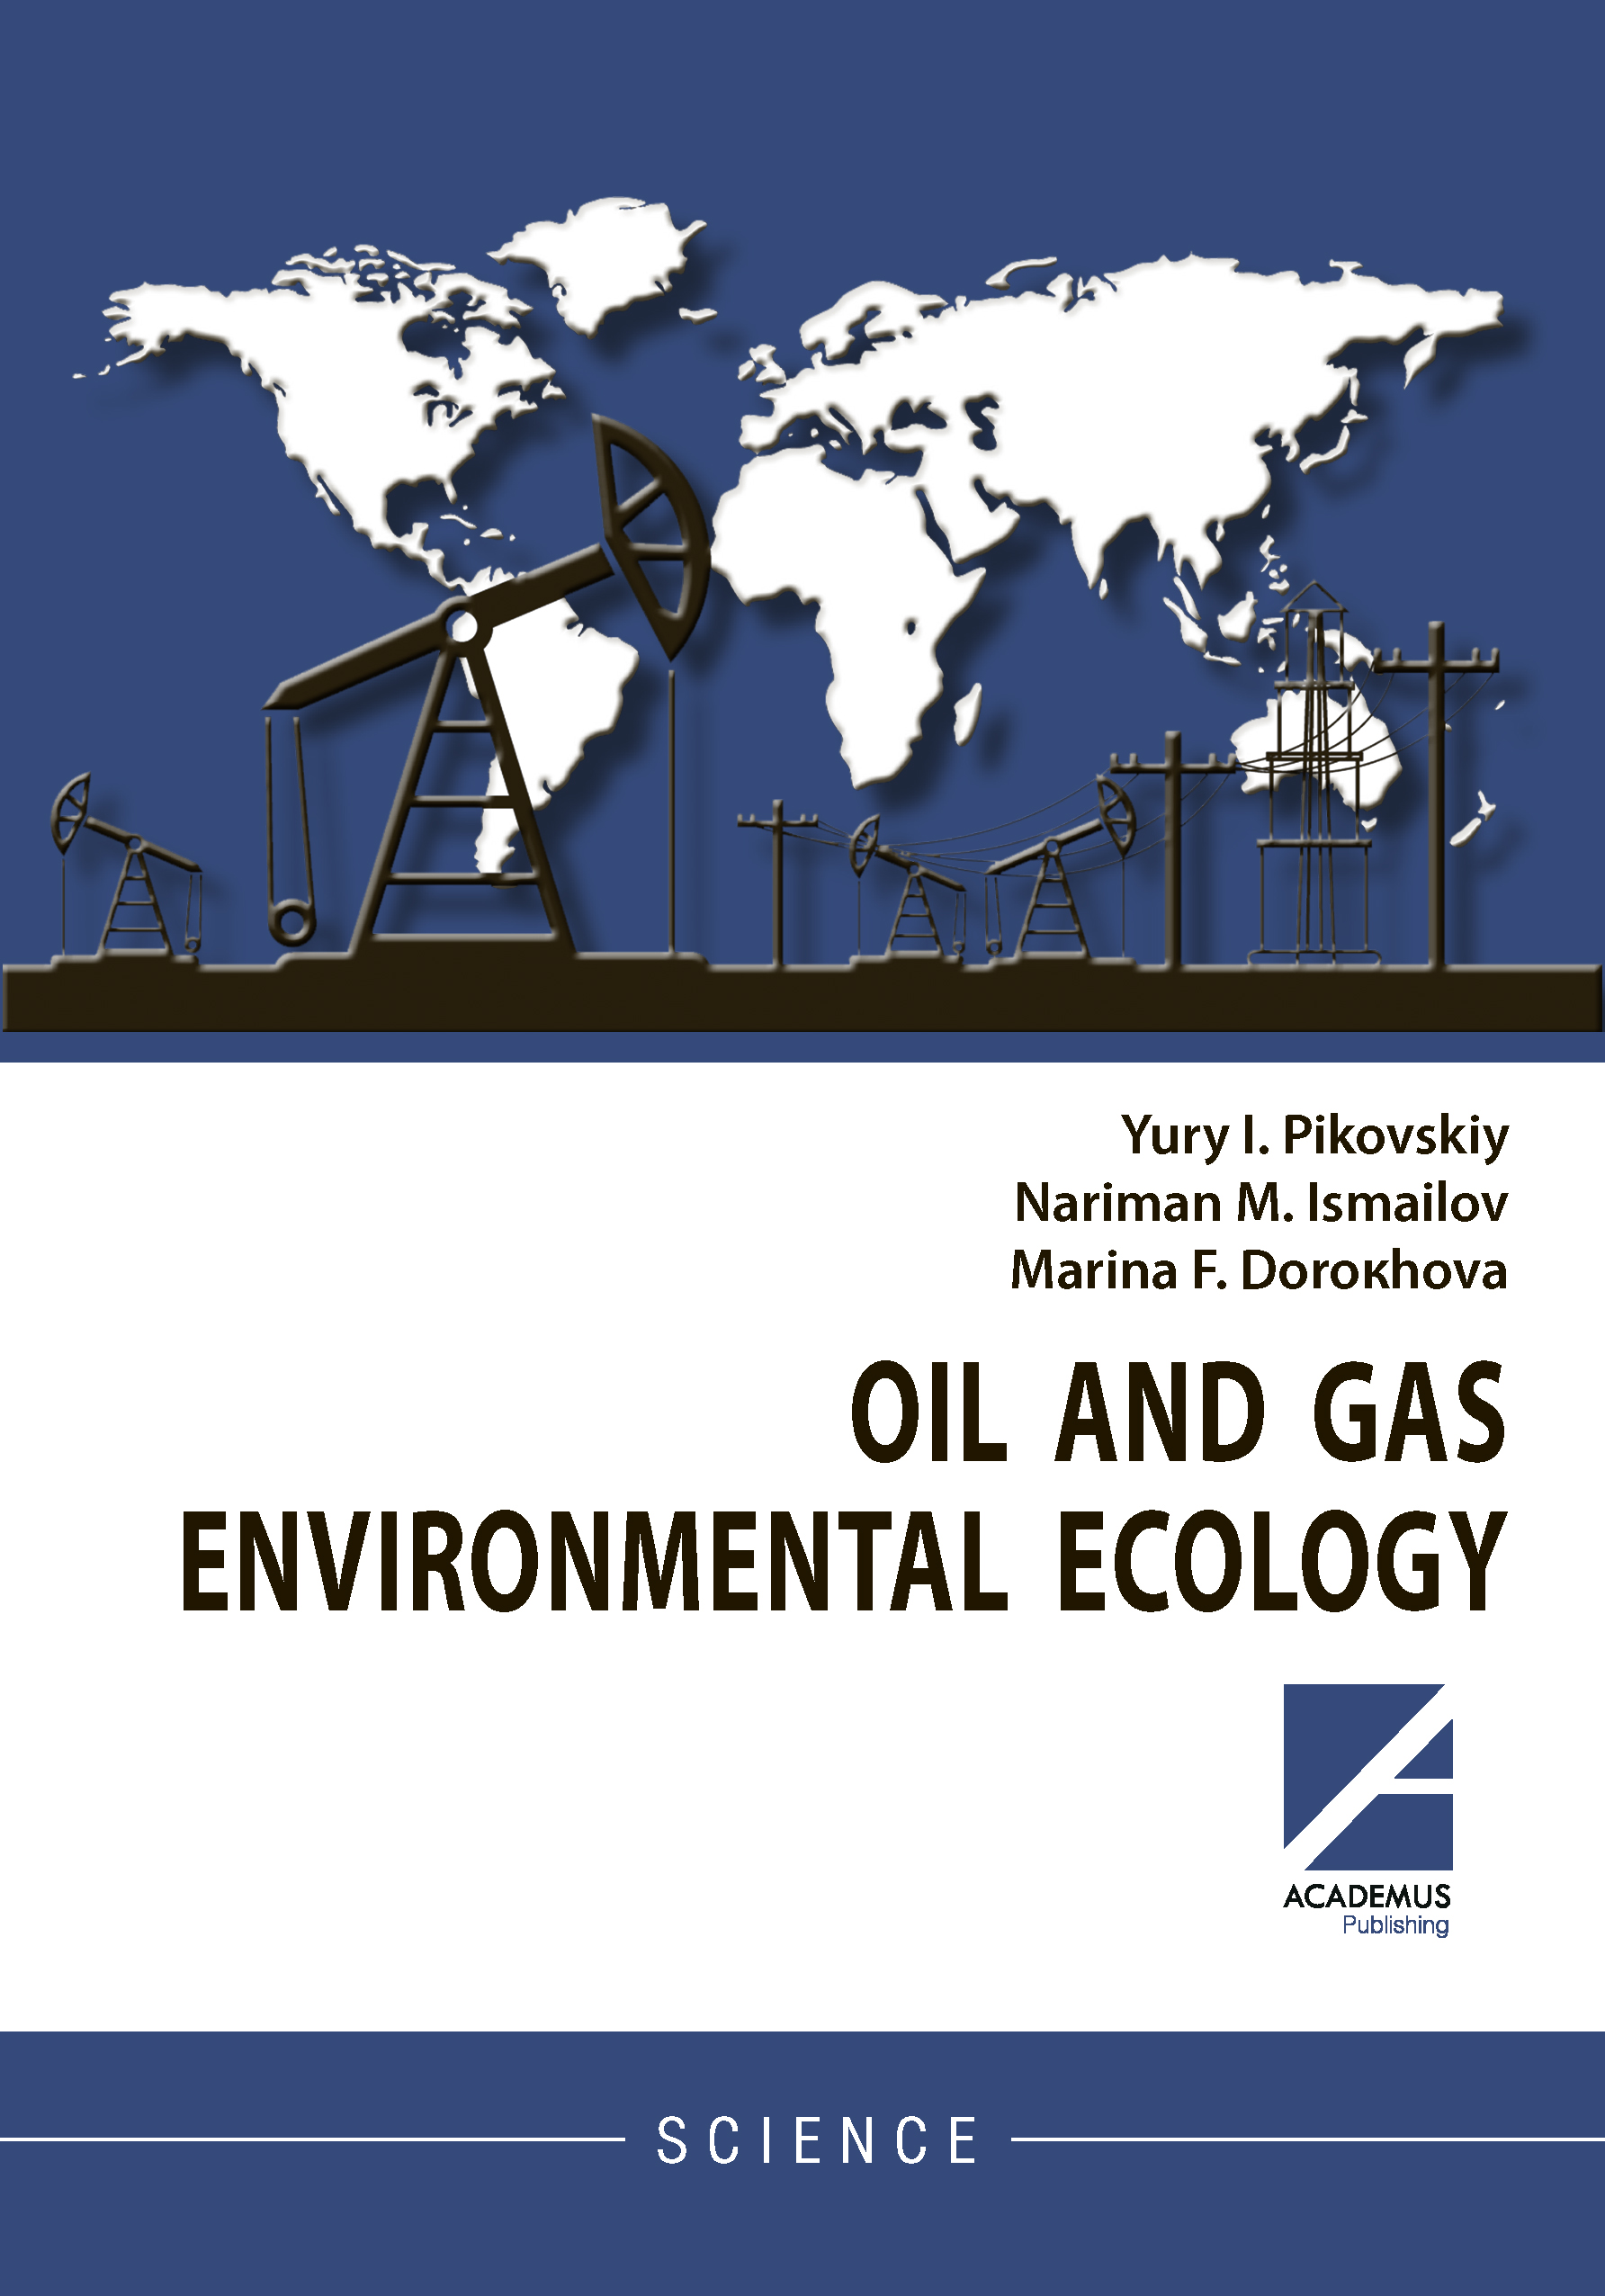                         OIL AND GAS ENVIRONMENTAL ECOLOGY
            